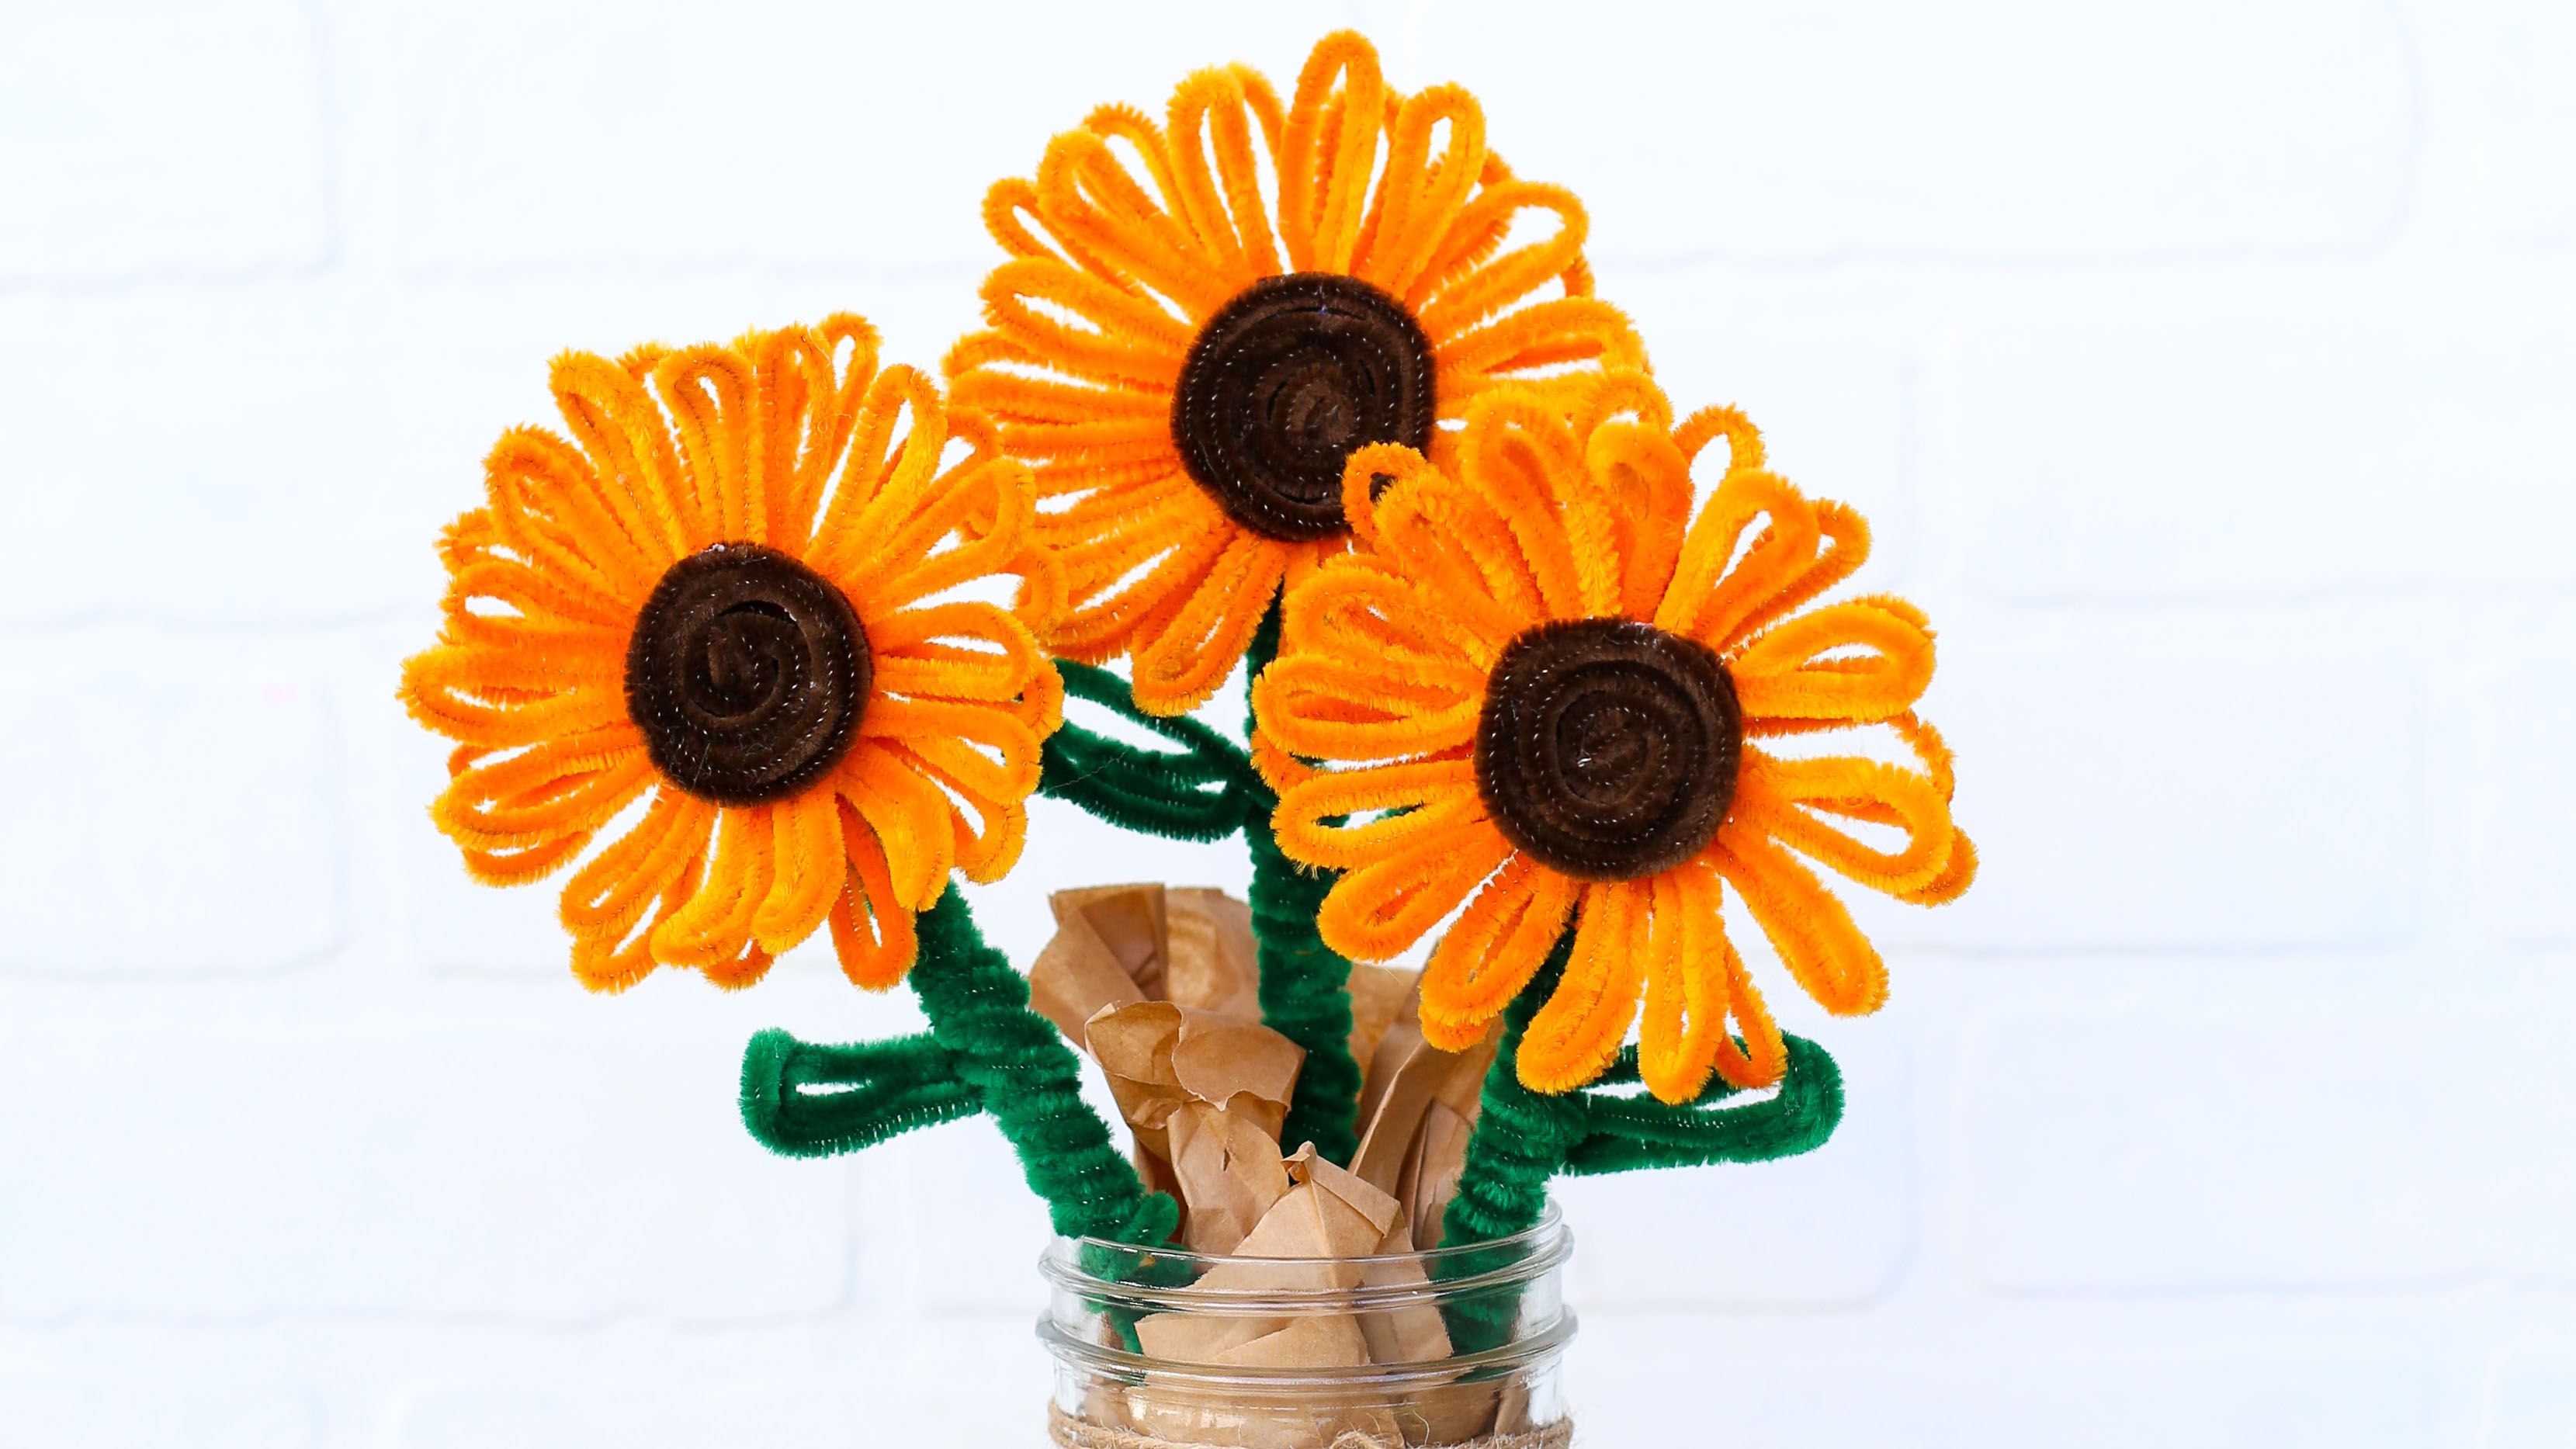 Pipe cleaner flowers - This crafty family